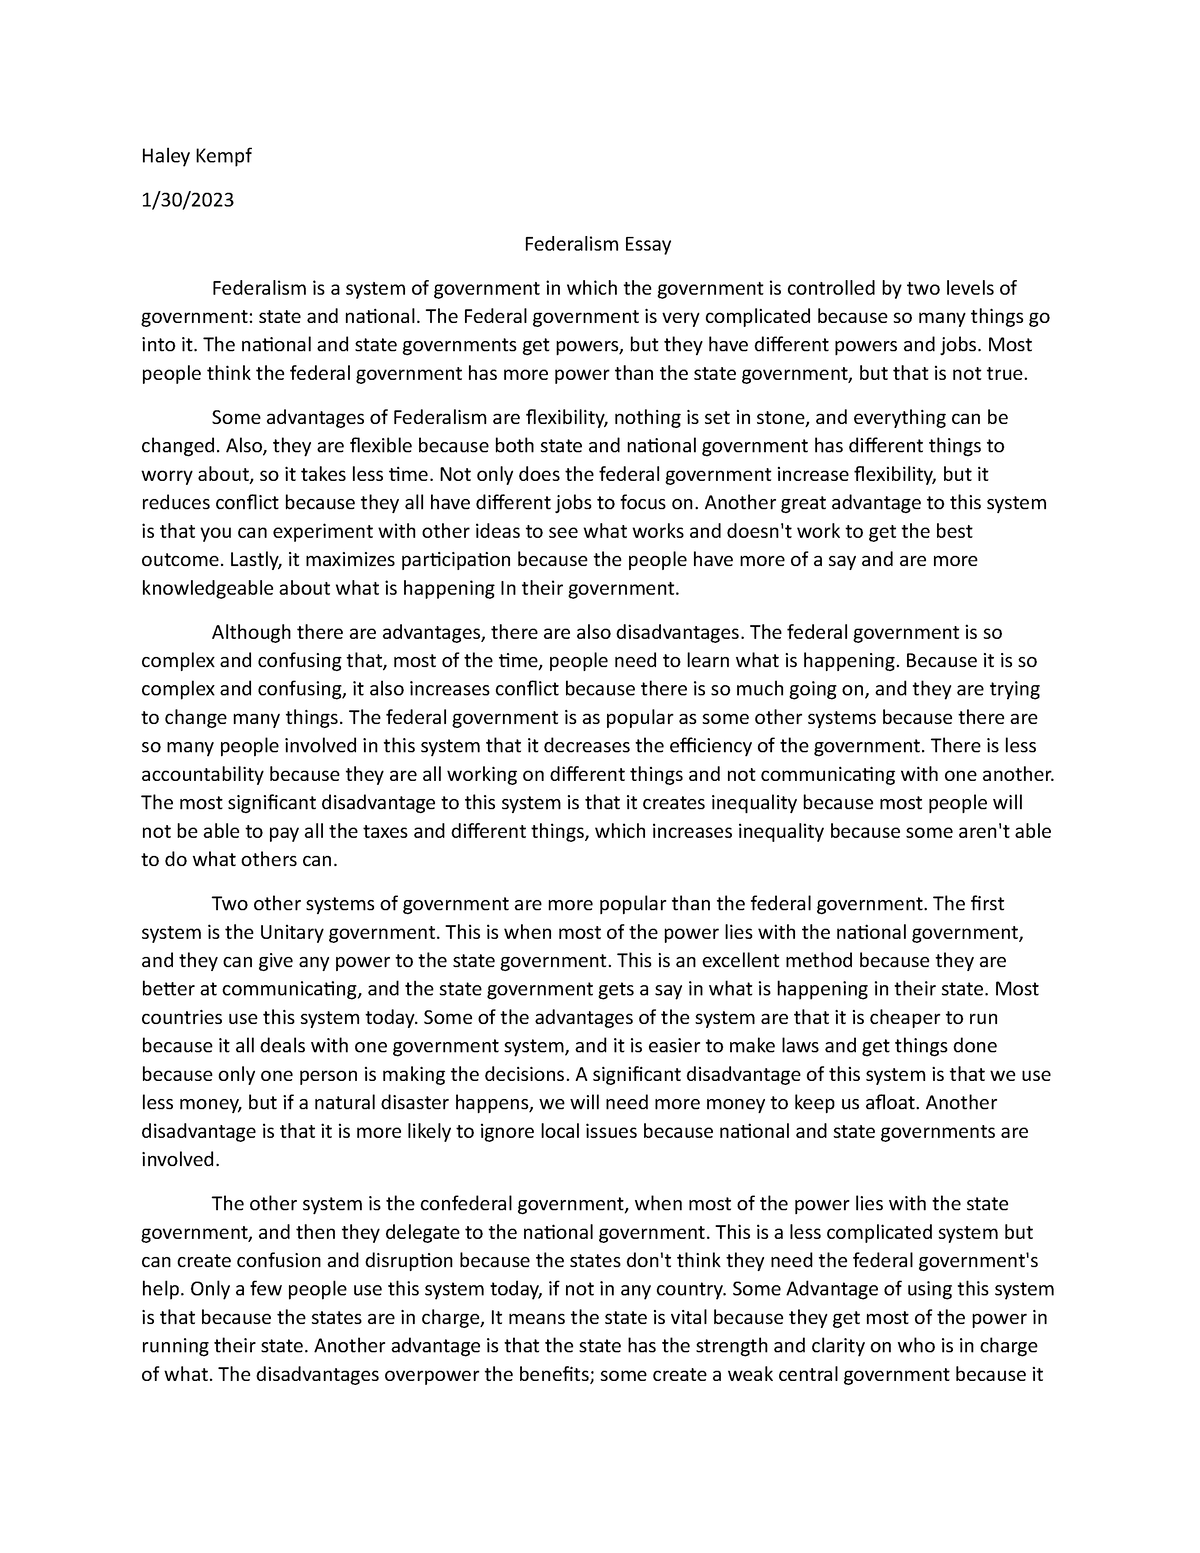 federalism and education essay